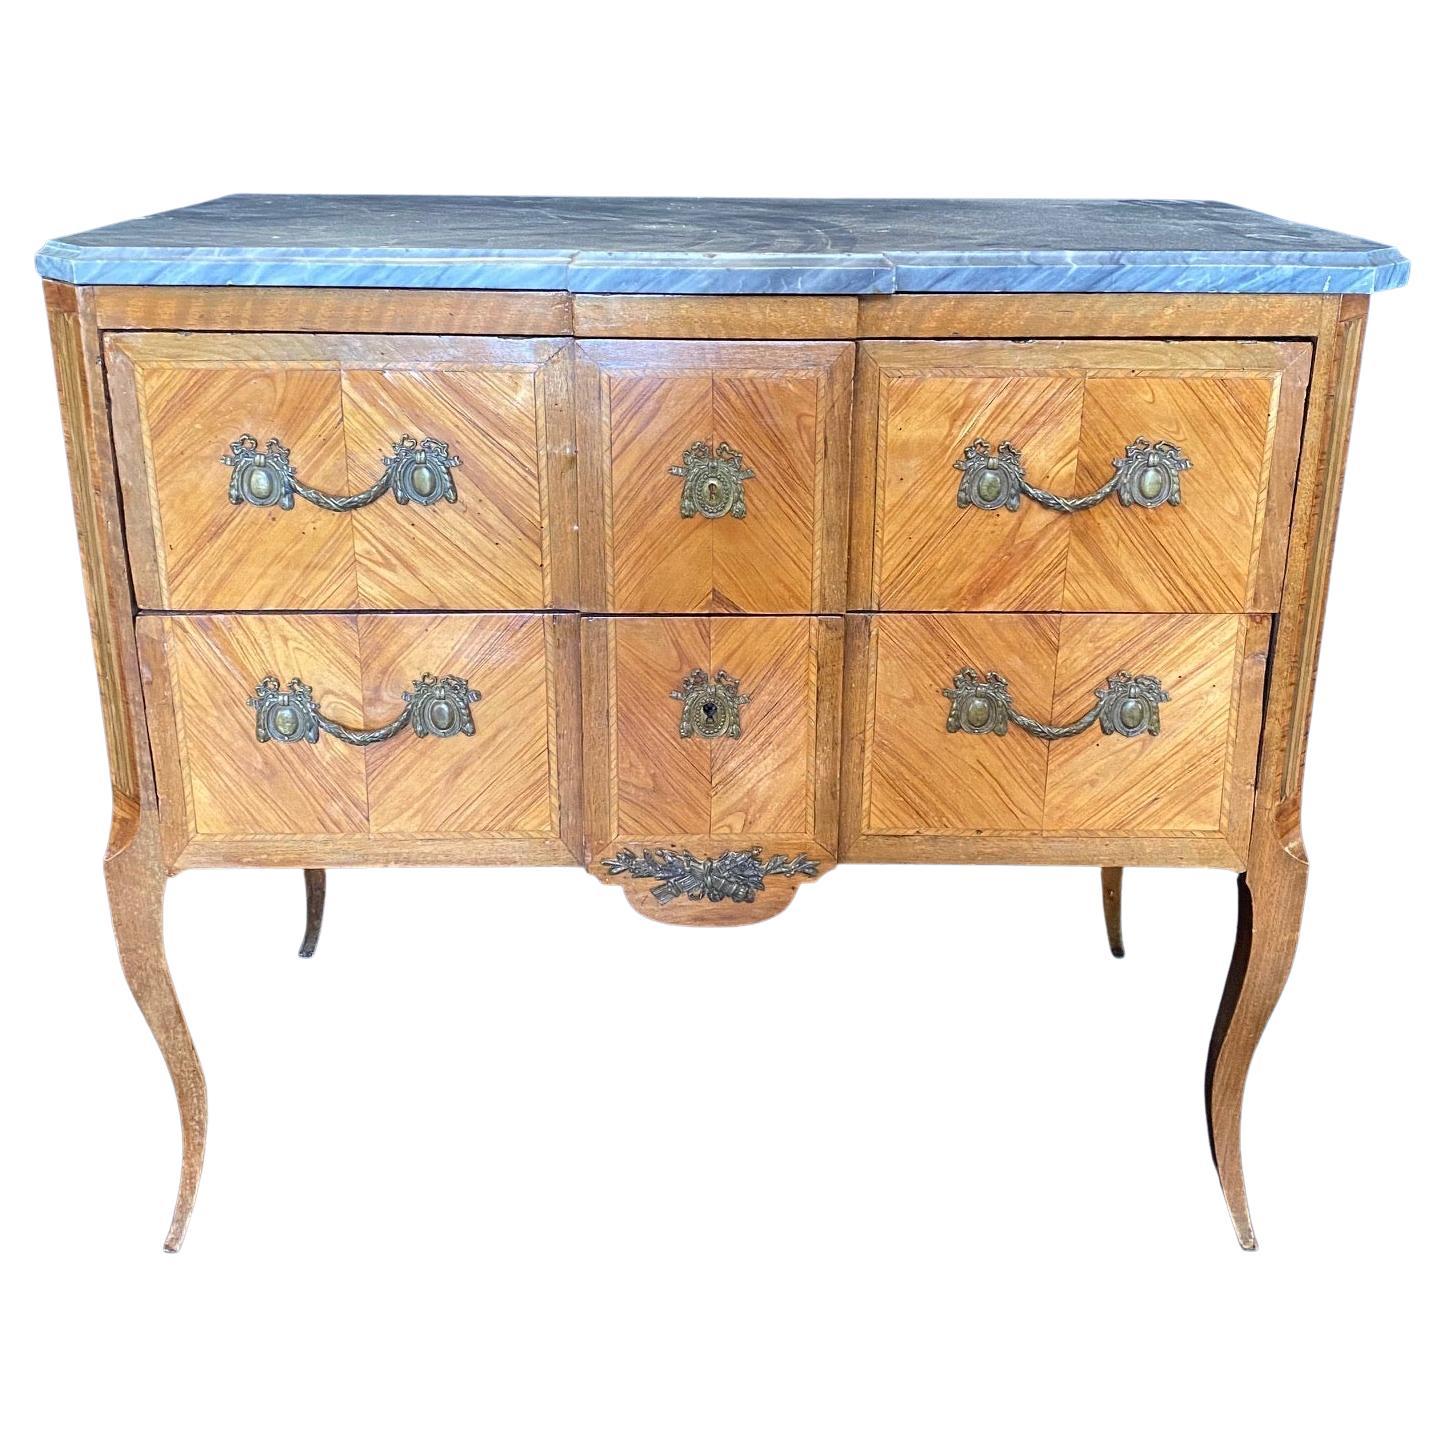 Exquisite Inlaid 19th Century French Chest of Drawers with Ormolu Mounts For Sale